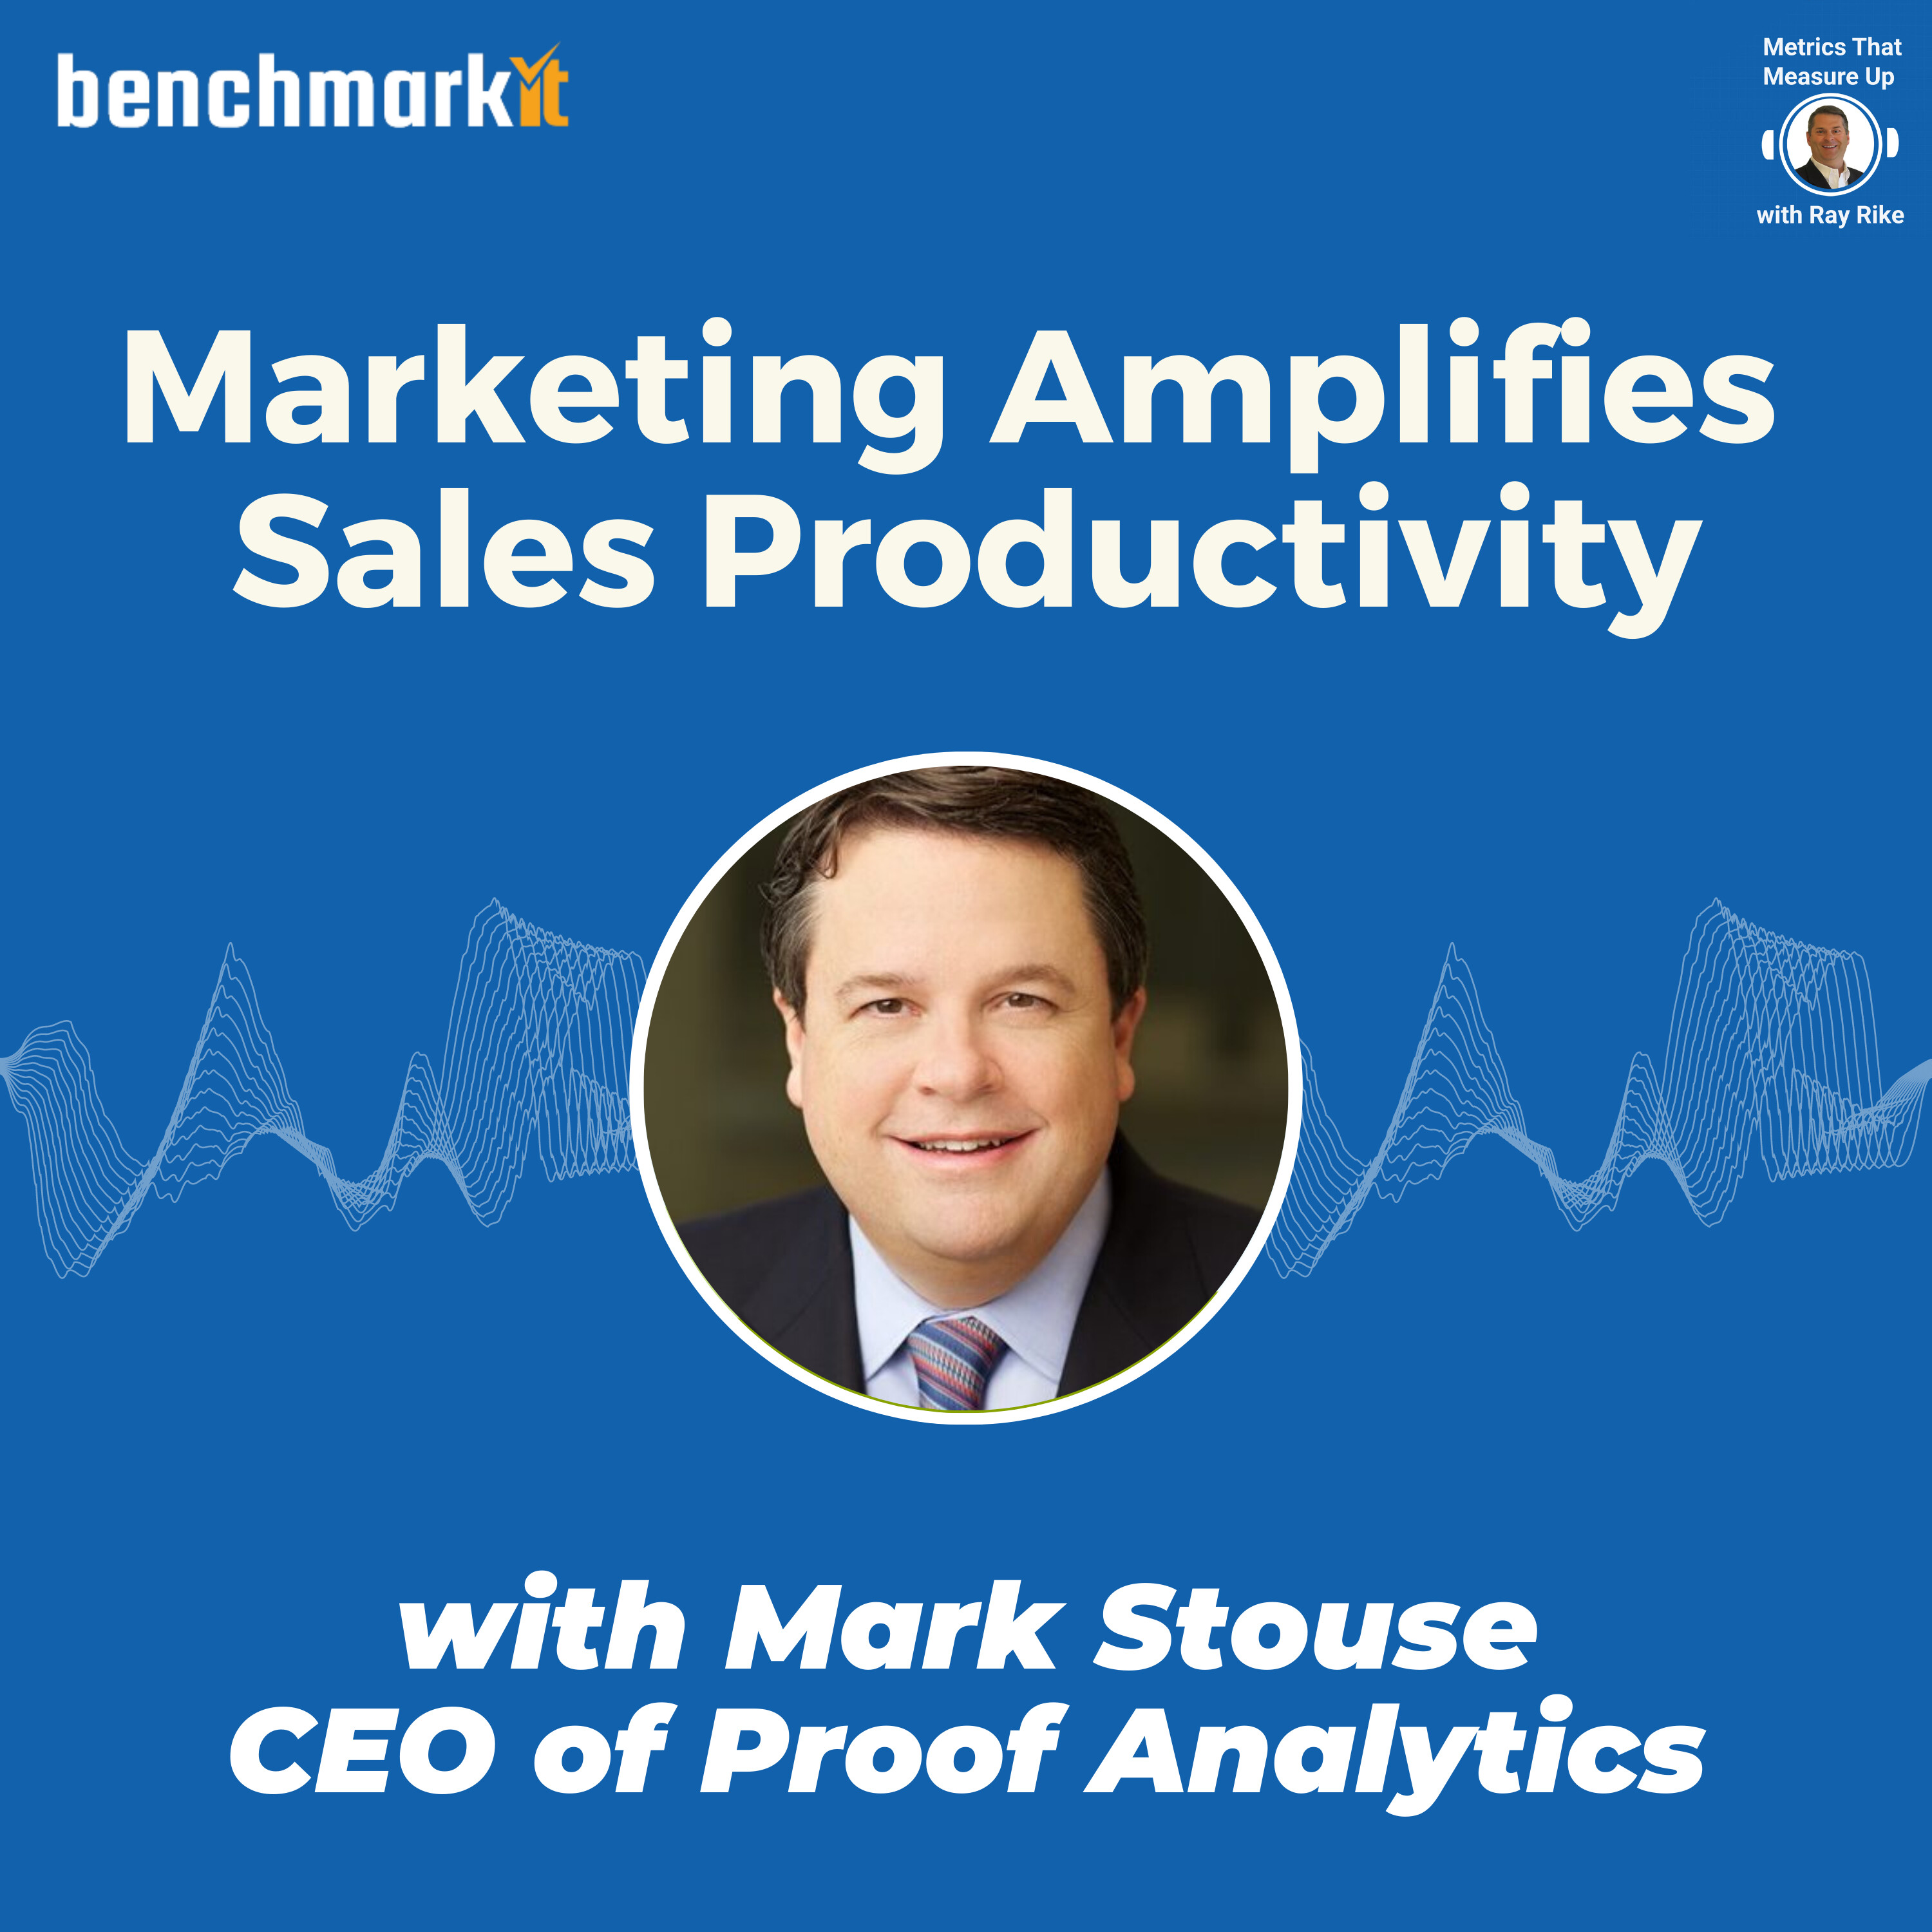 Marketing as a Sales Productivity Amplifier - with Mark Stouse, CEO Proof Analytics